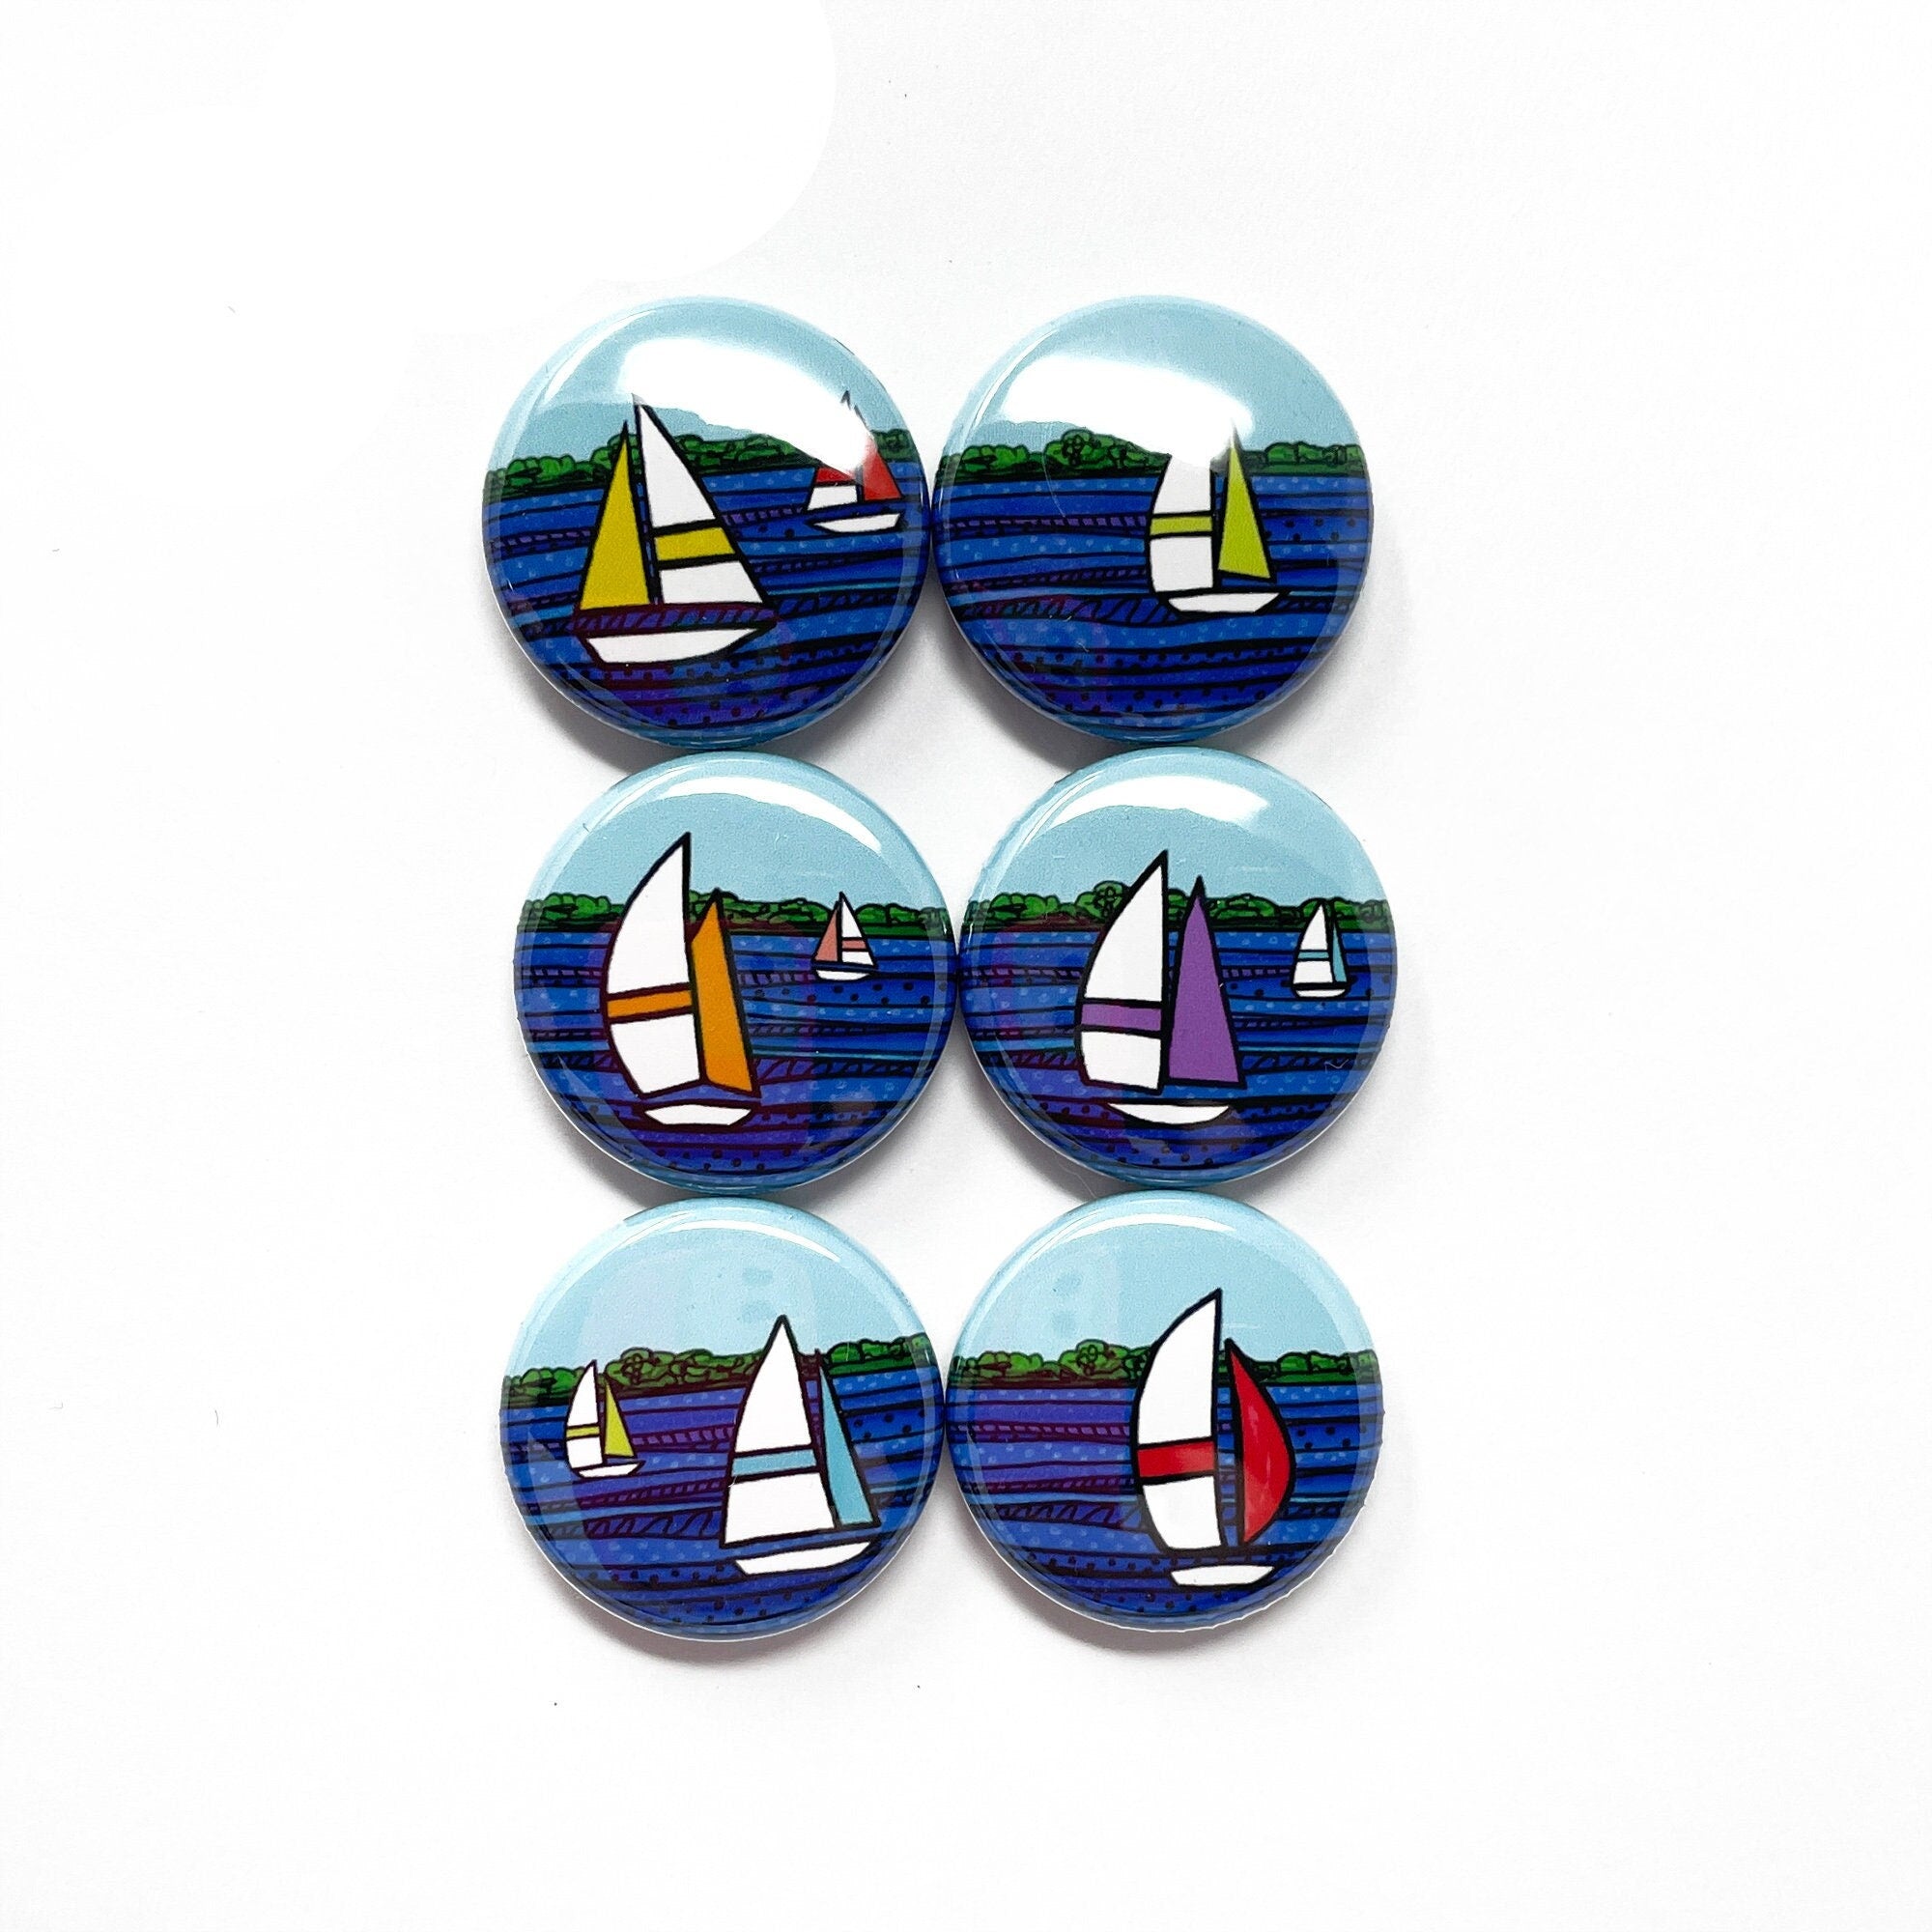 Sail Boat Race Magnet or Pinback Button Set -  1 inch Magnets or Pins - Sailboat, Regatta, Sailing, Nautical Gift, Party Favor